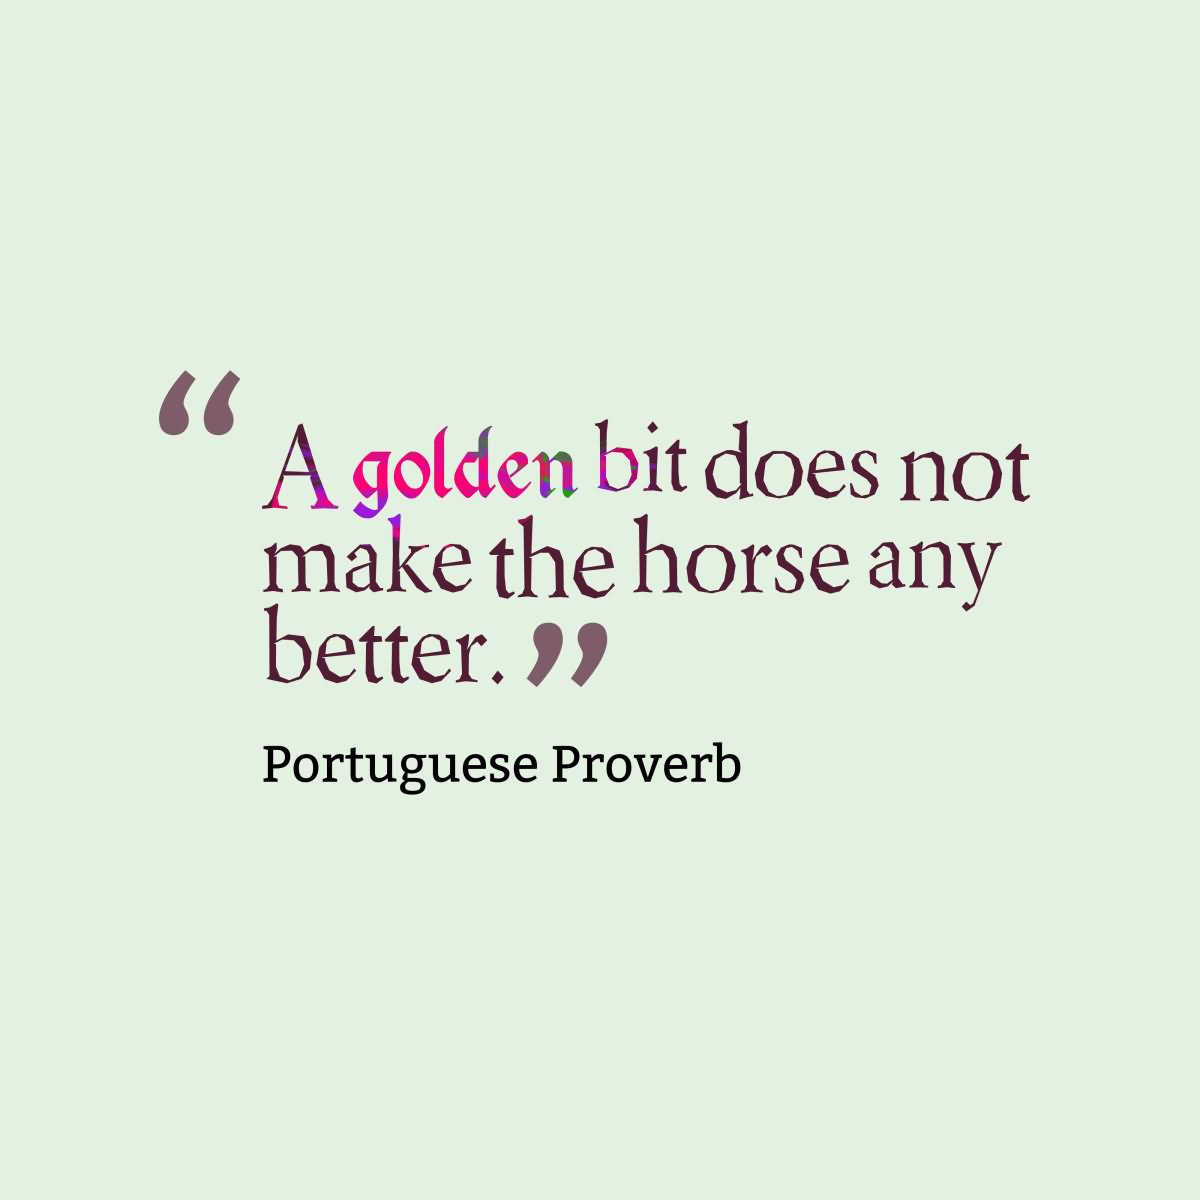 A golden bit does not make the horse any better.